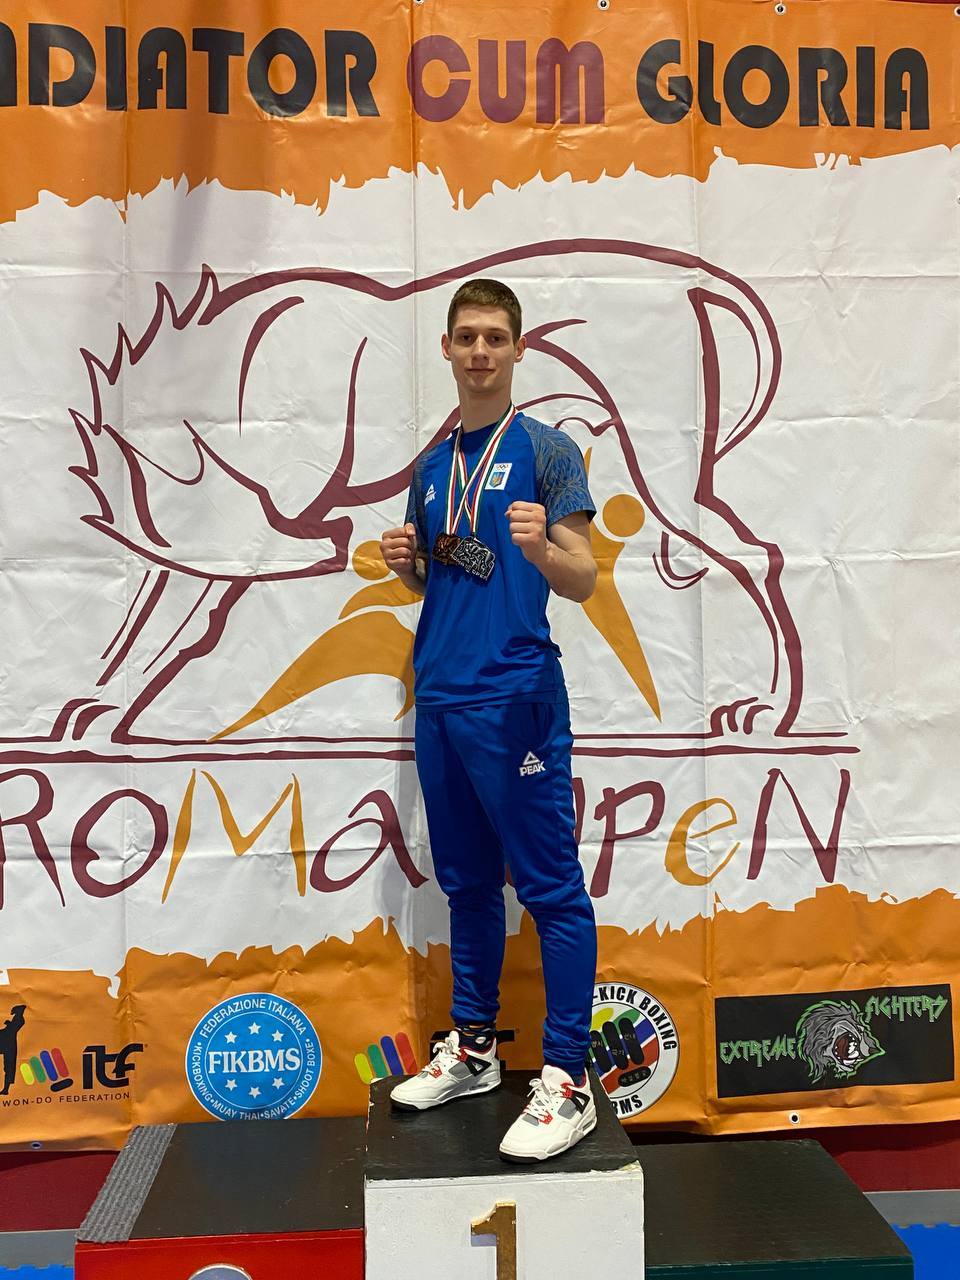 Congratulations to our student with the prize places at the Roma Open 2024 Taekwon-Do tournament!